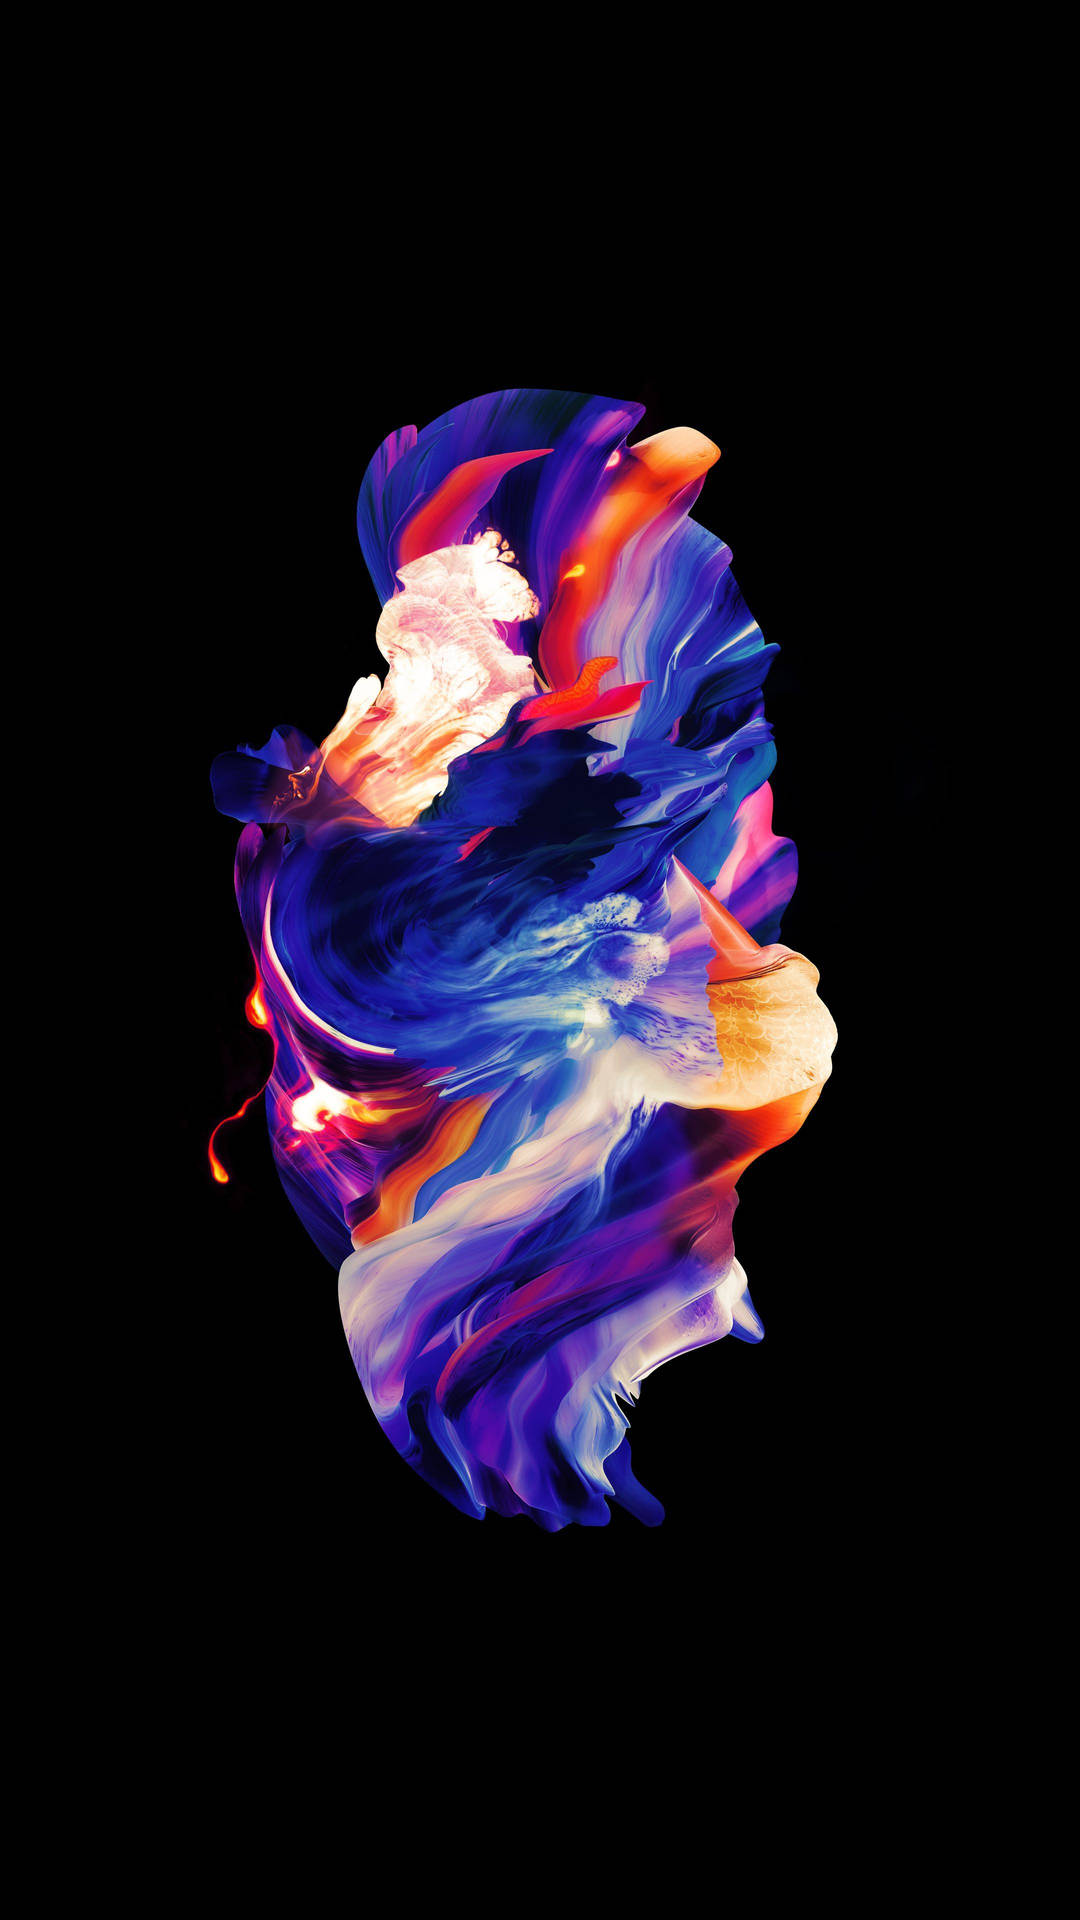 A work of art with vibrant colors radiating on an Amoled screen Wallpaper